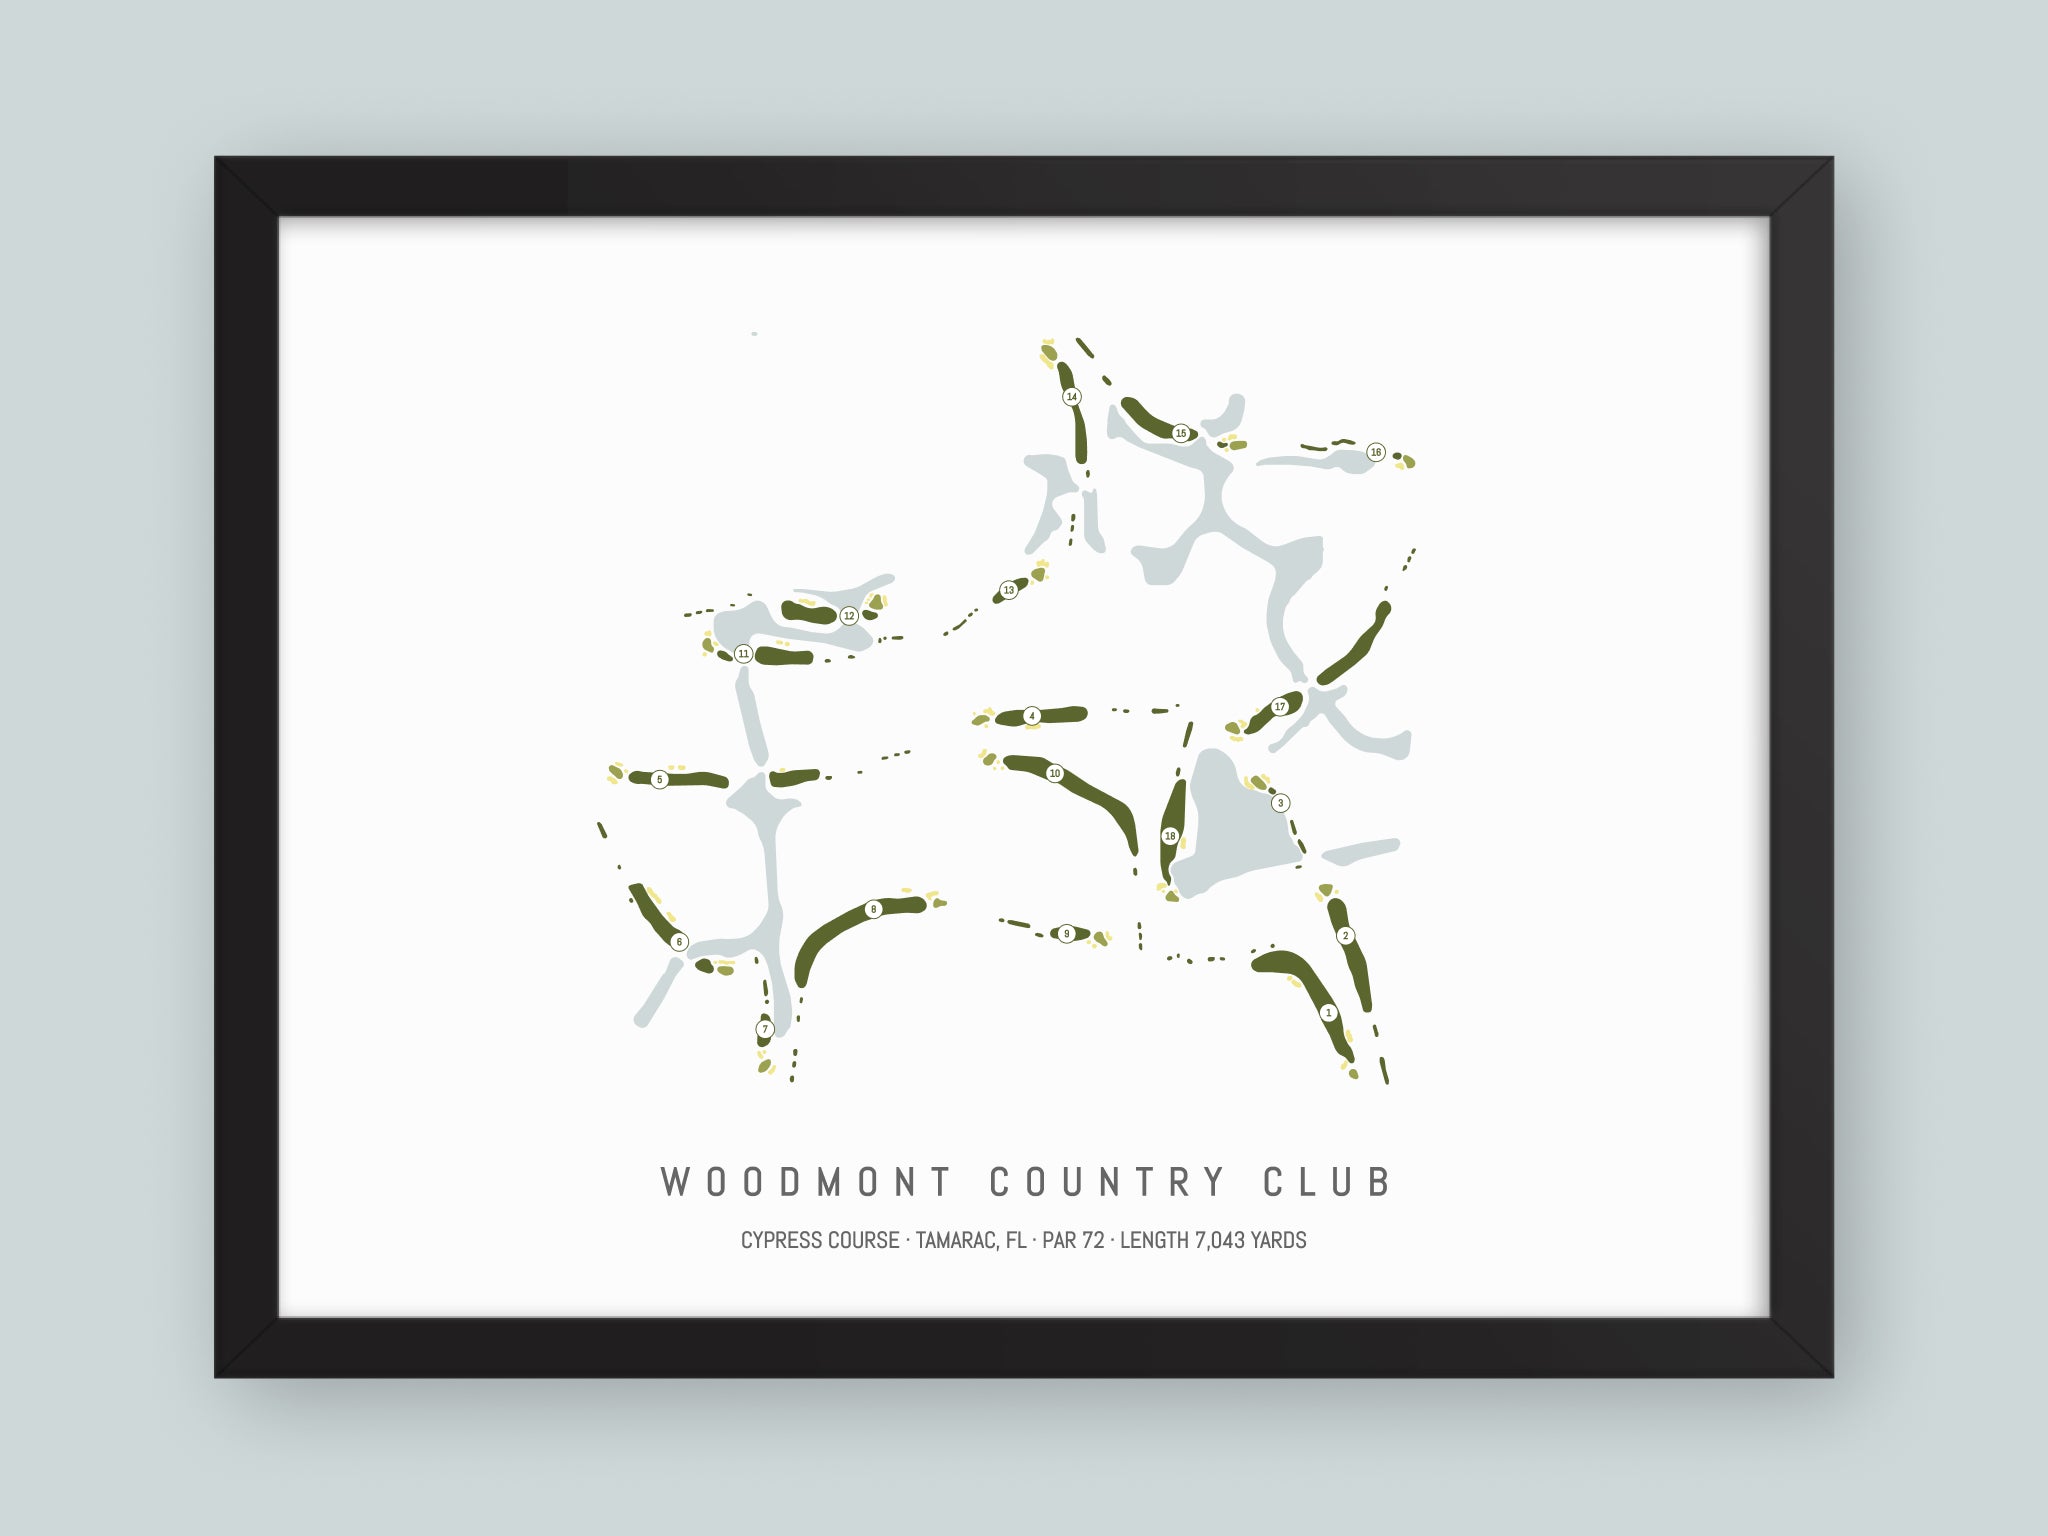 Woodmont-Country-Club-Cypress-Course-FL--Black-Frame-24x18-With-Hole-Numbers